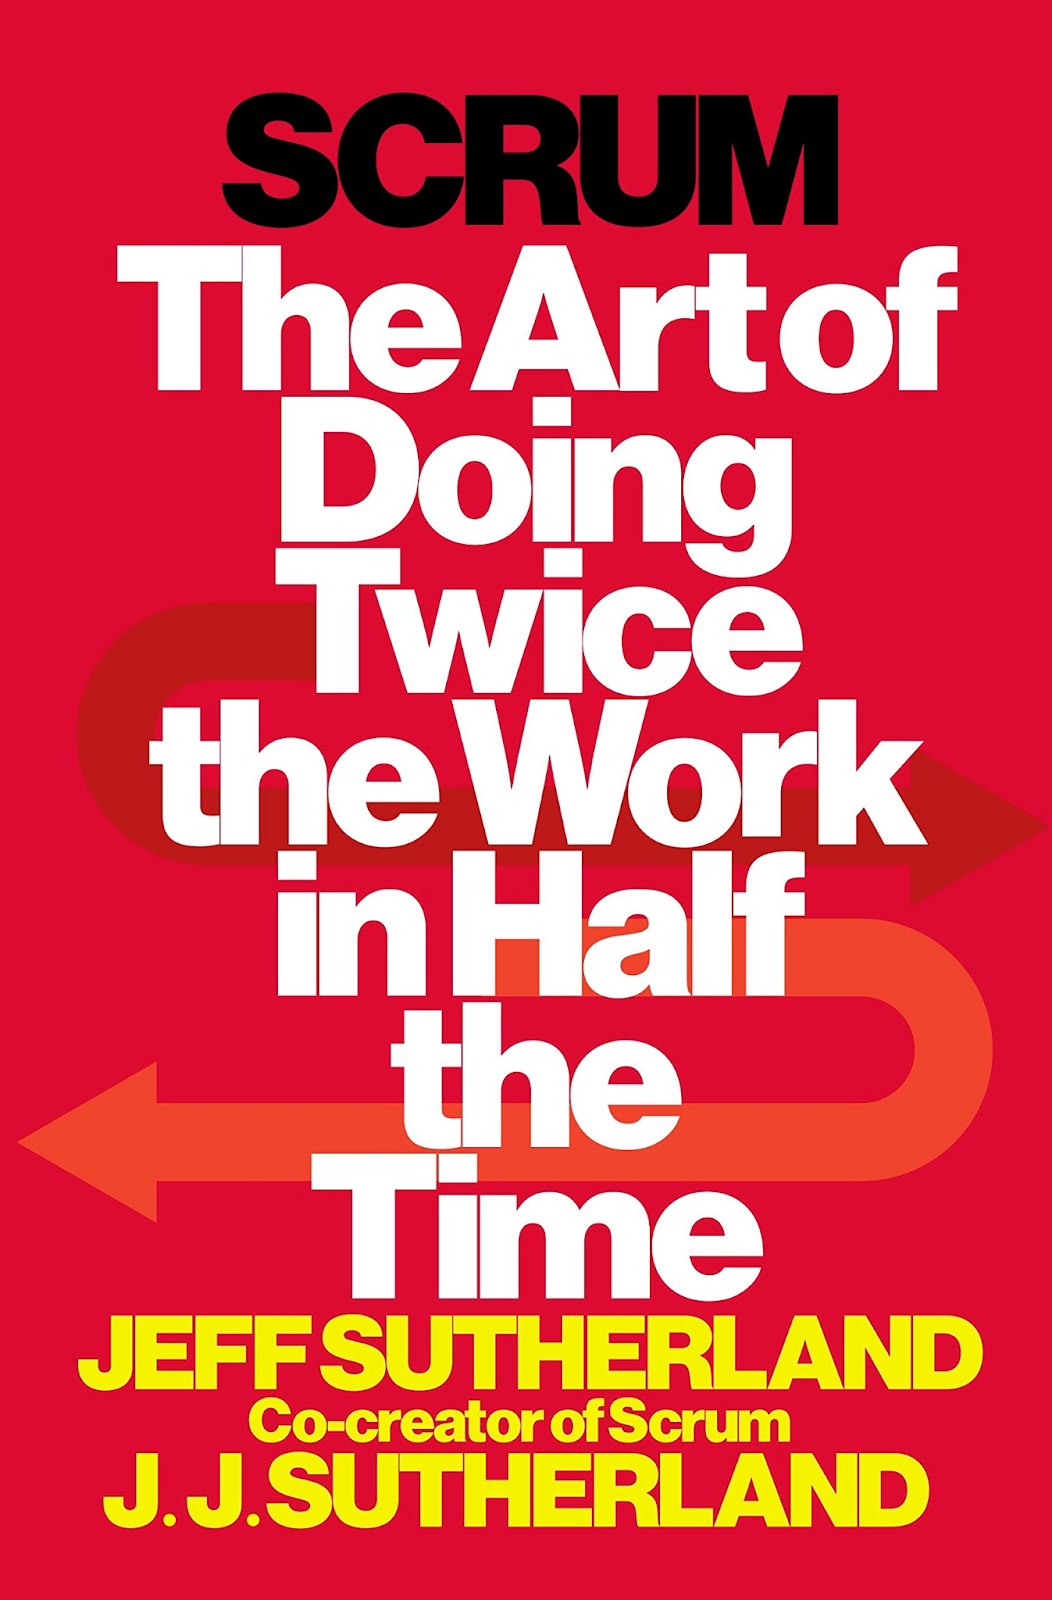  Scrum: The Art of Doing Twice the Work in Half the Time - product management books